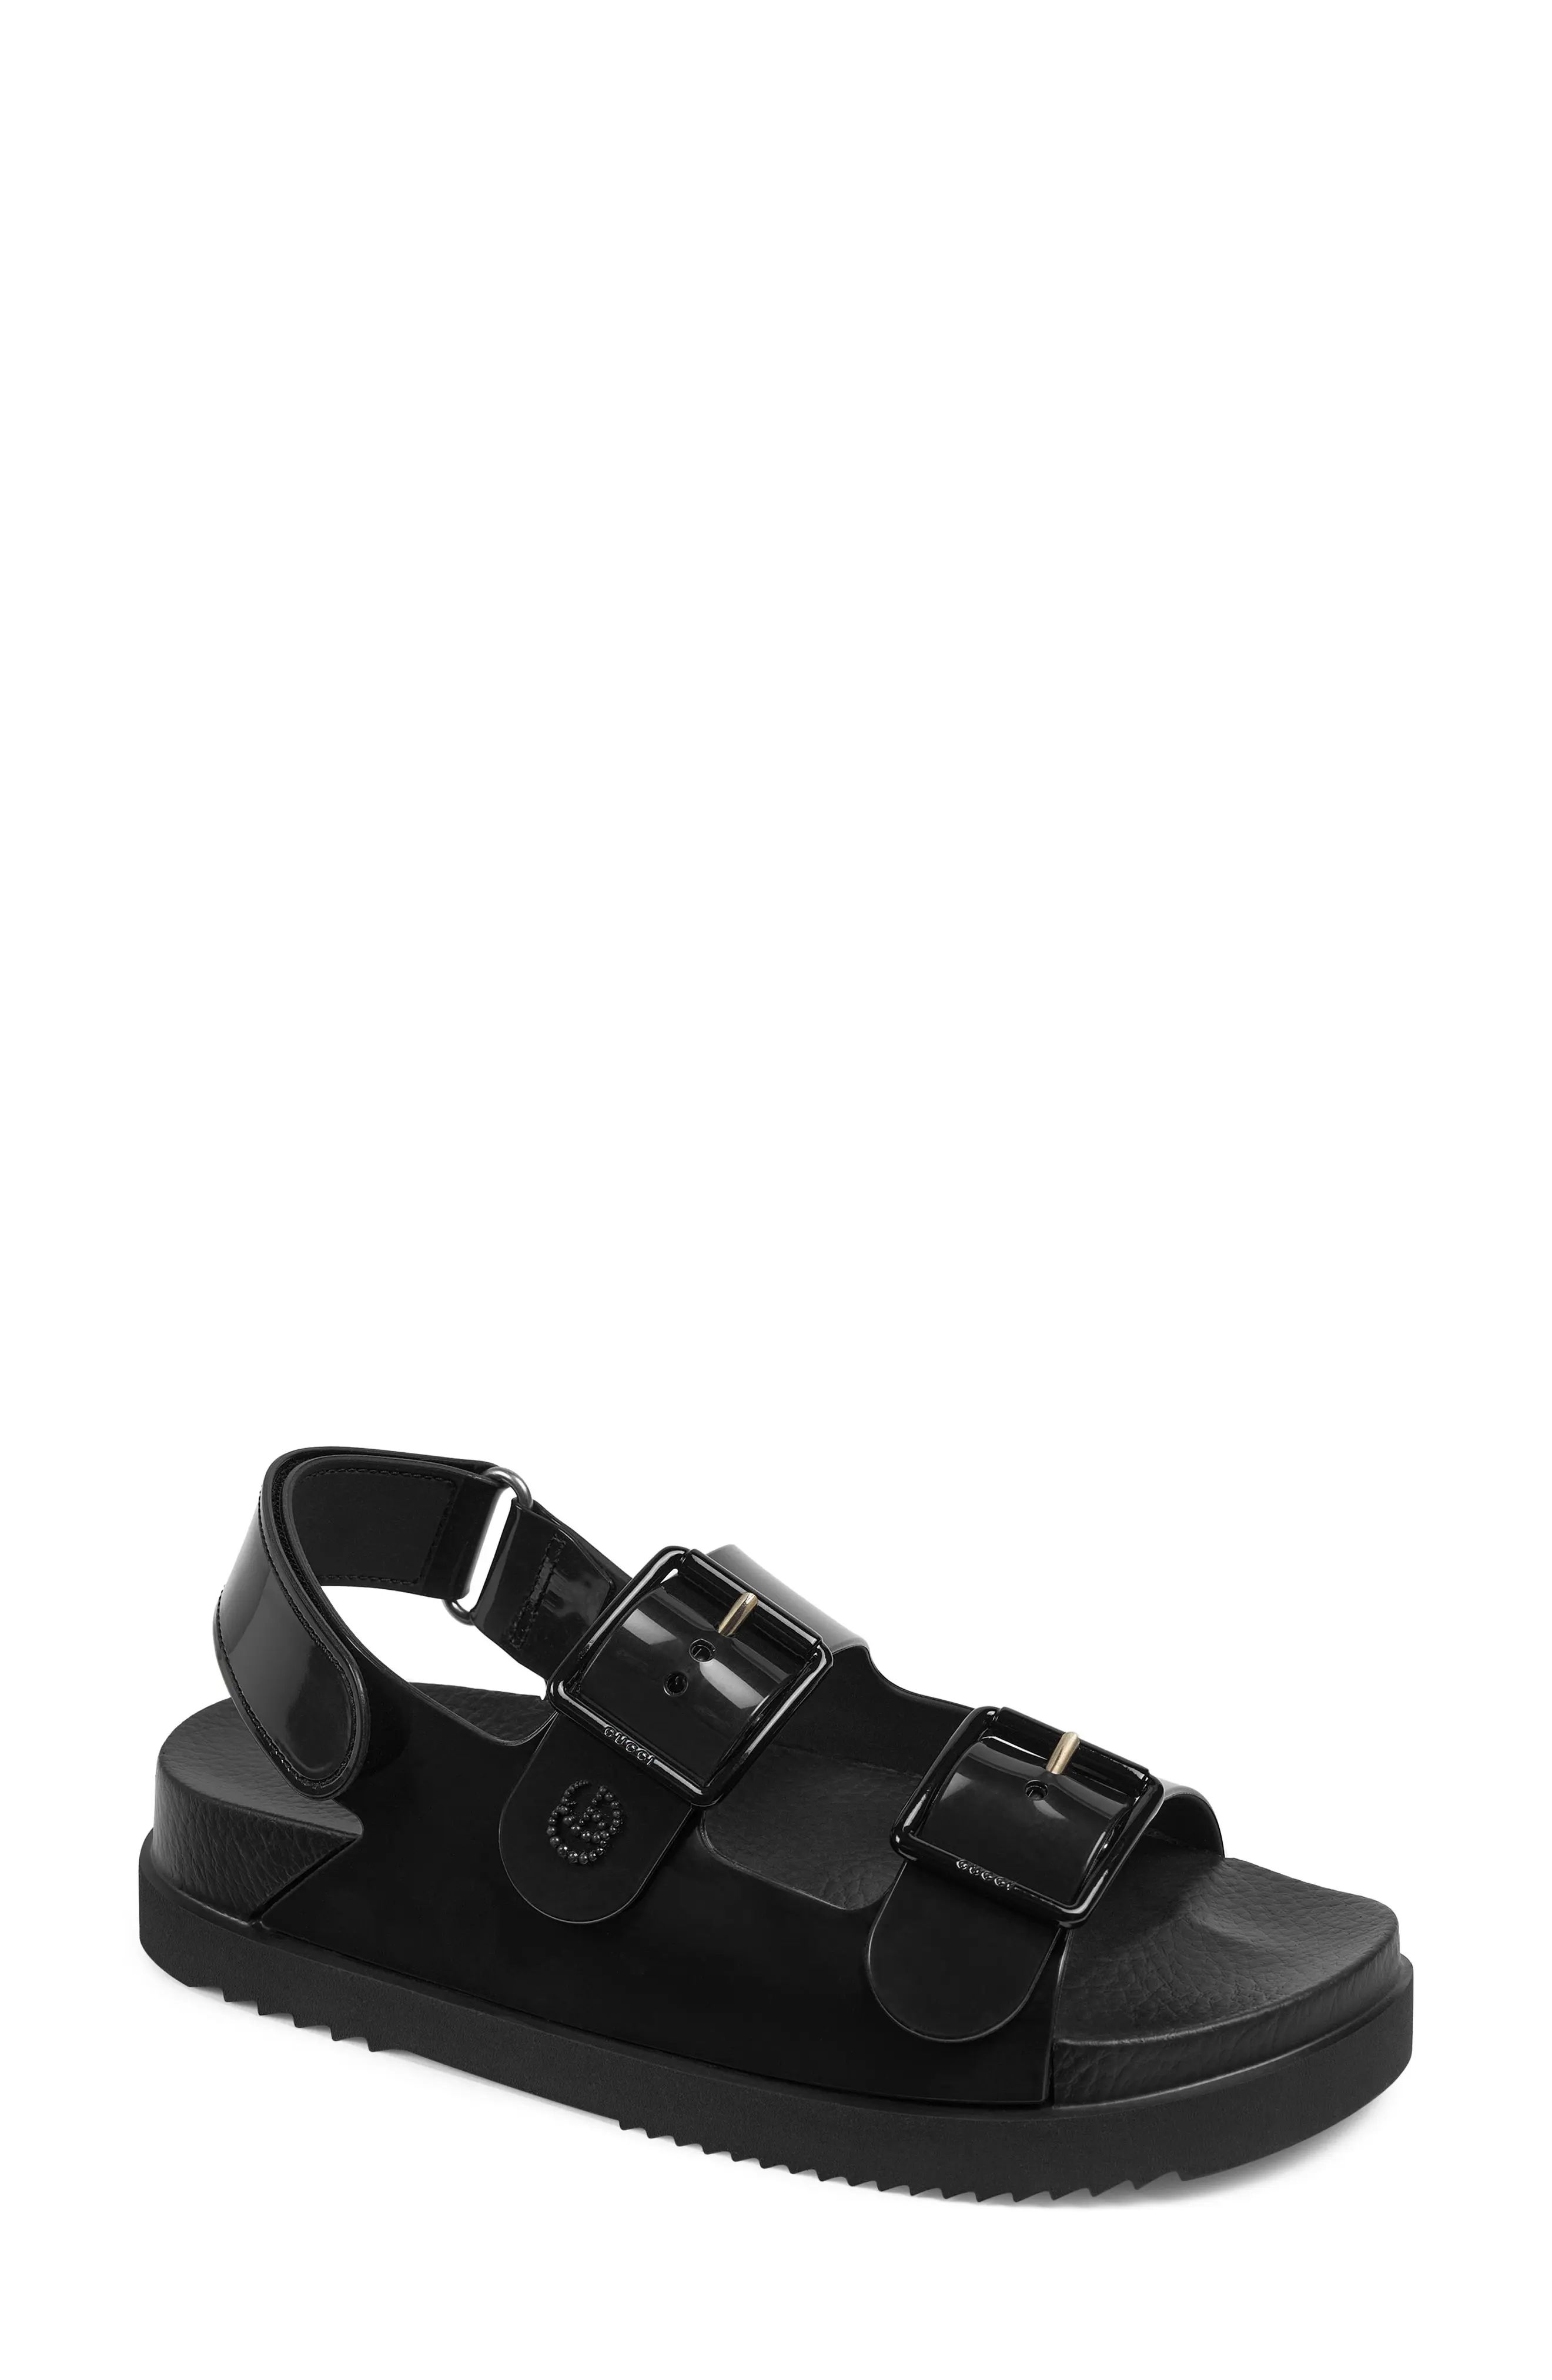 Gucci Isla Double Strap Sandal in Nero at Nordstrom, Size 9Us | Nordstrom